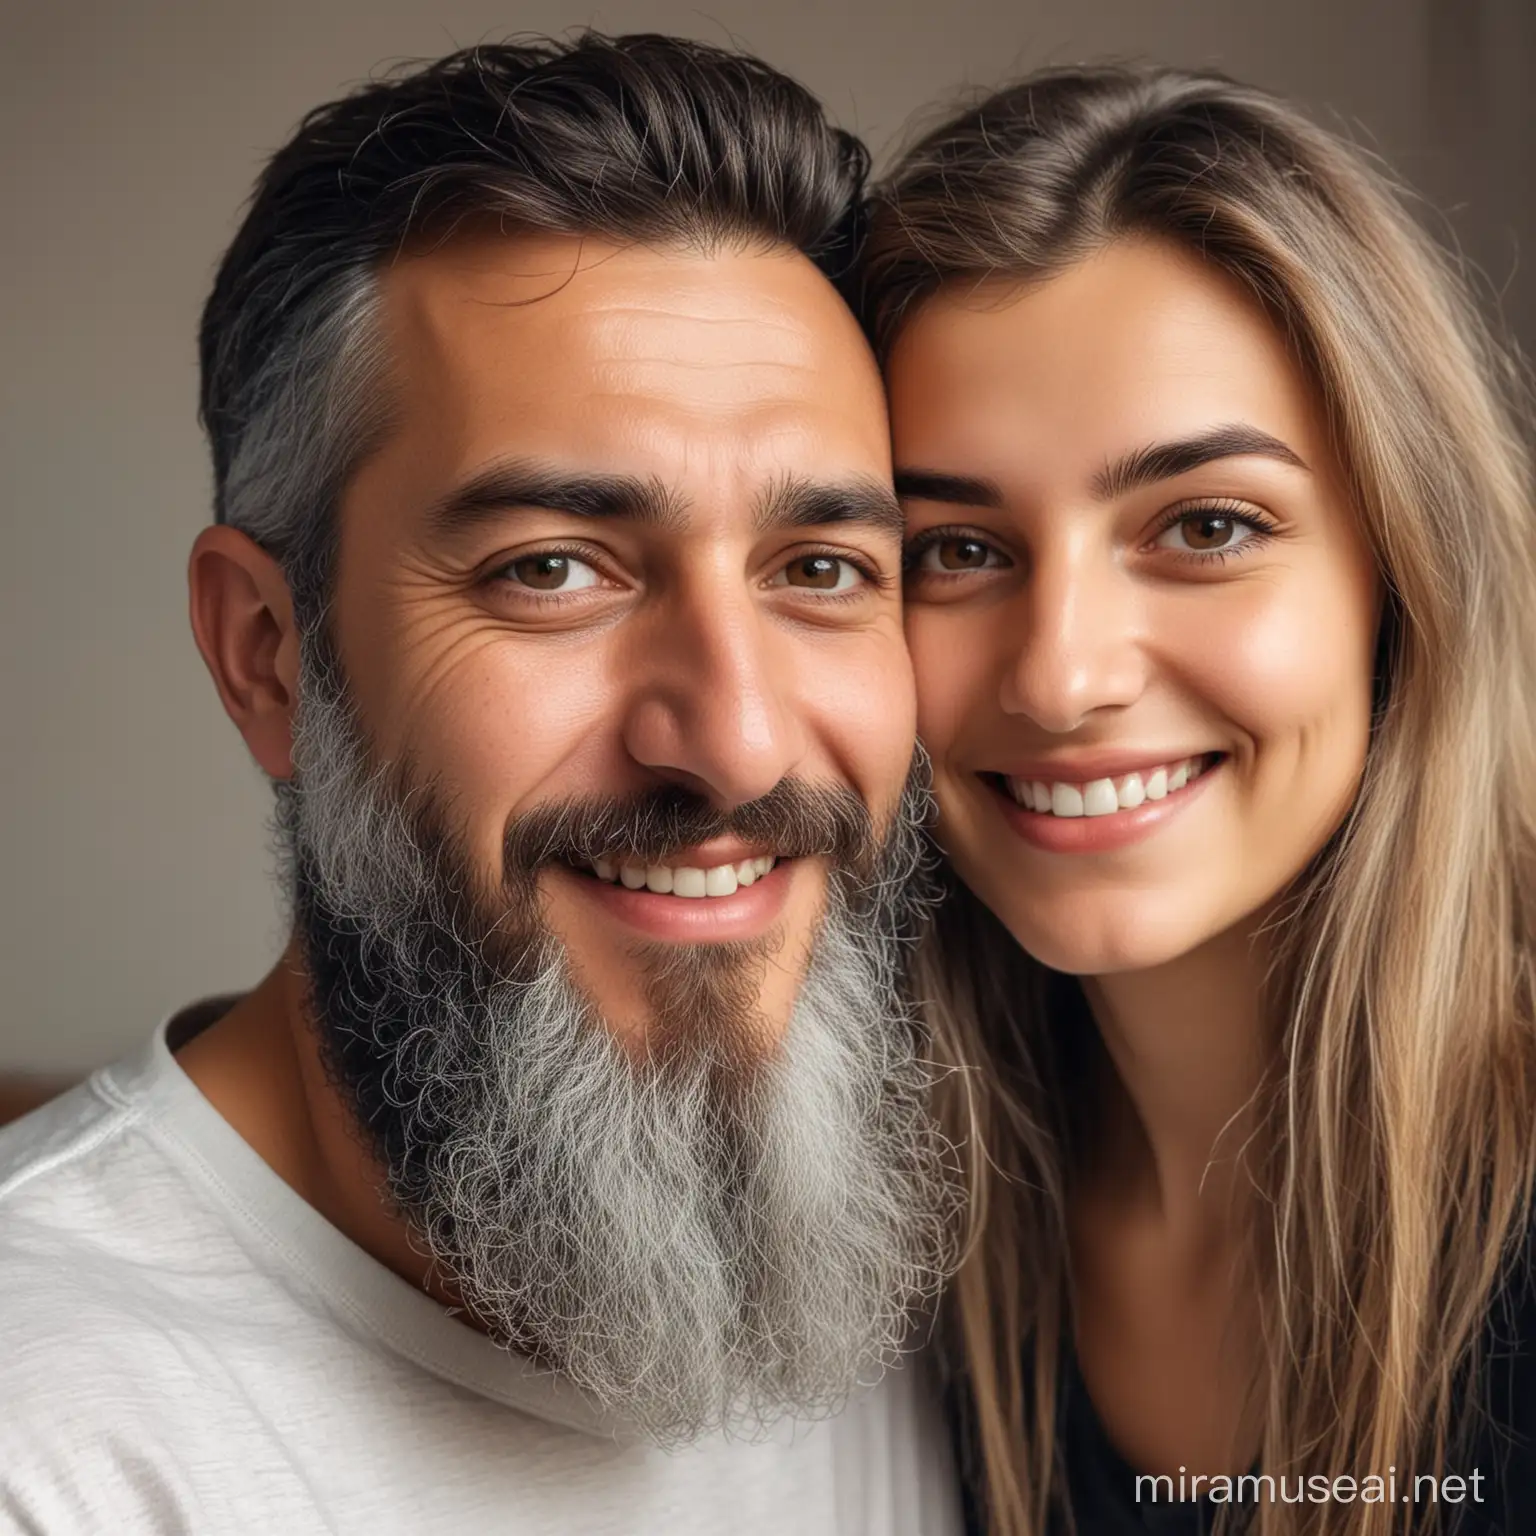 Turkish Man and Young Woman Admiring Picture Frame Joyful Lovers Moment